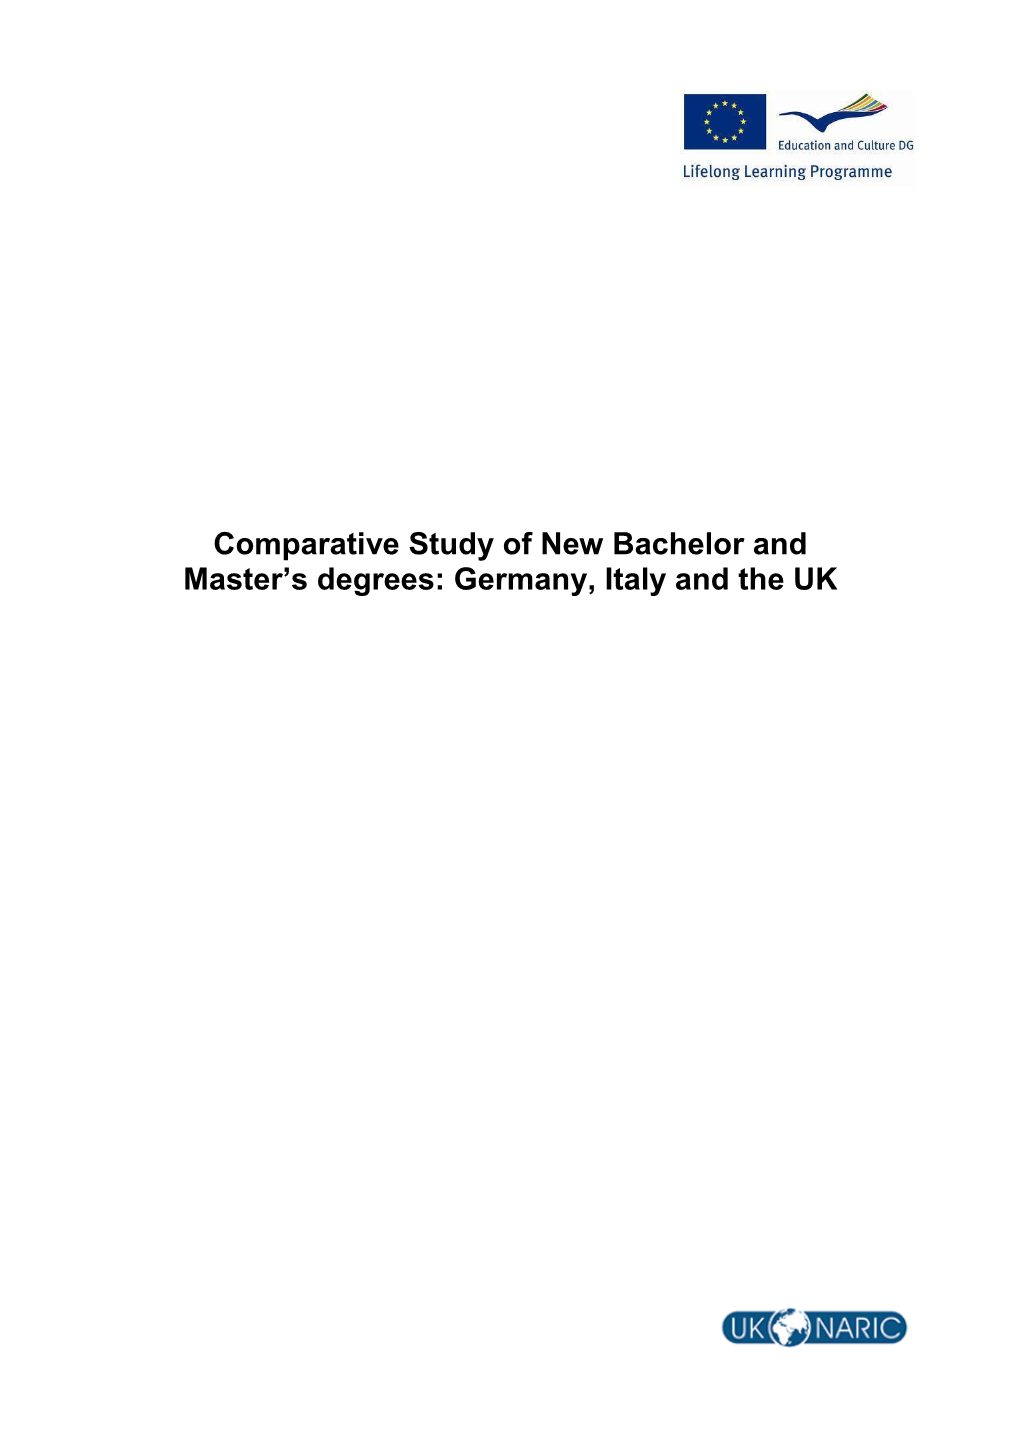 Comparative Study of New Bachelor and Master's Degrees